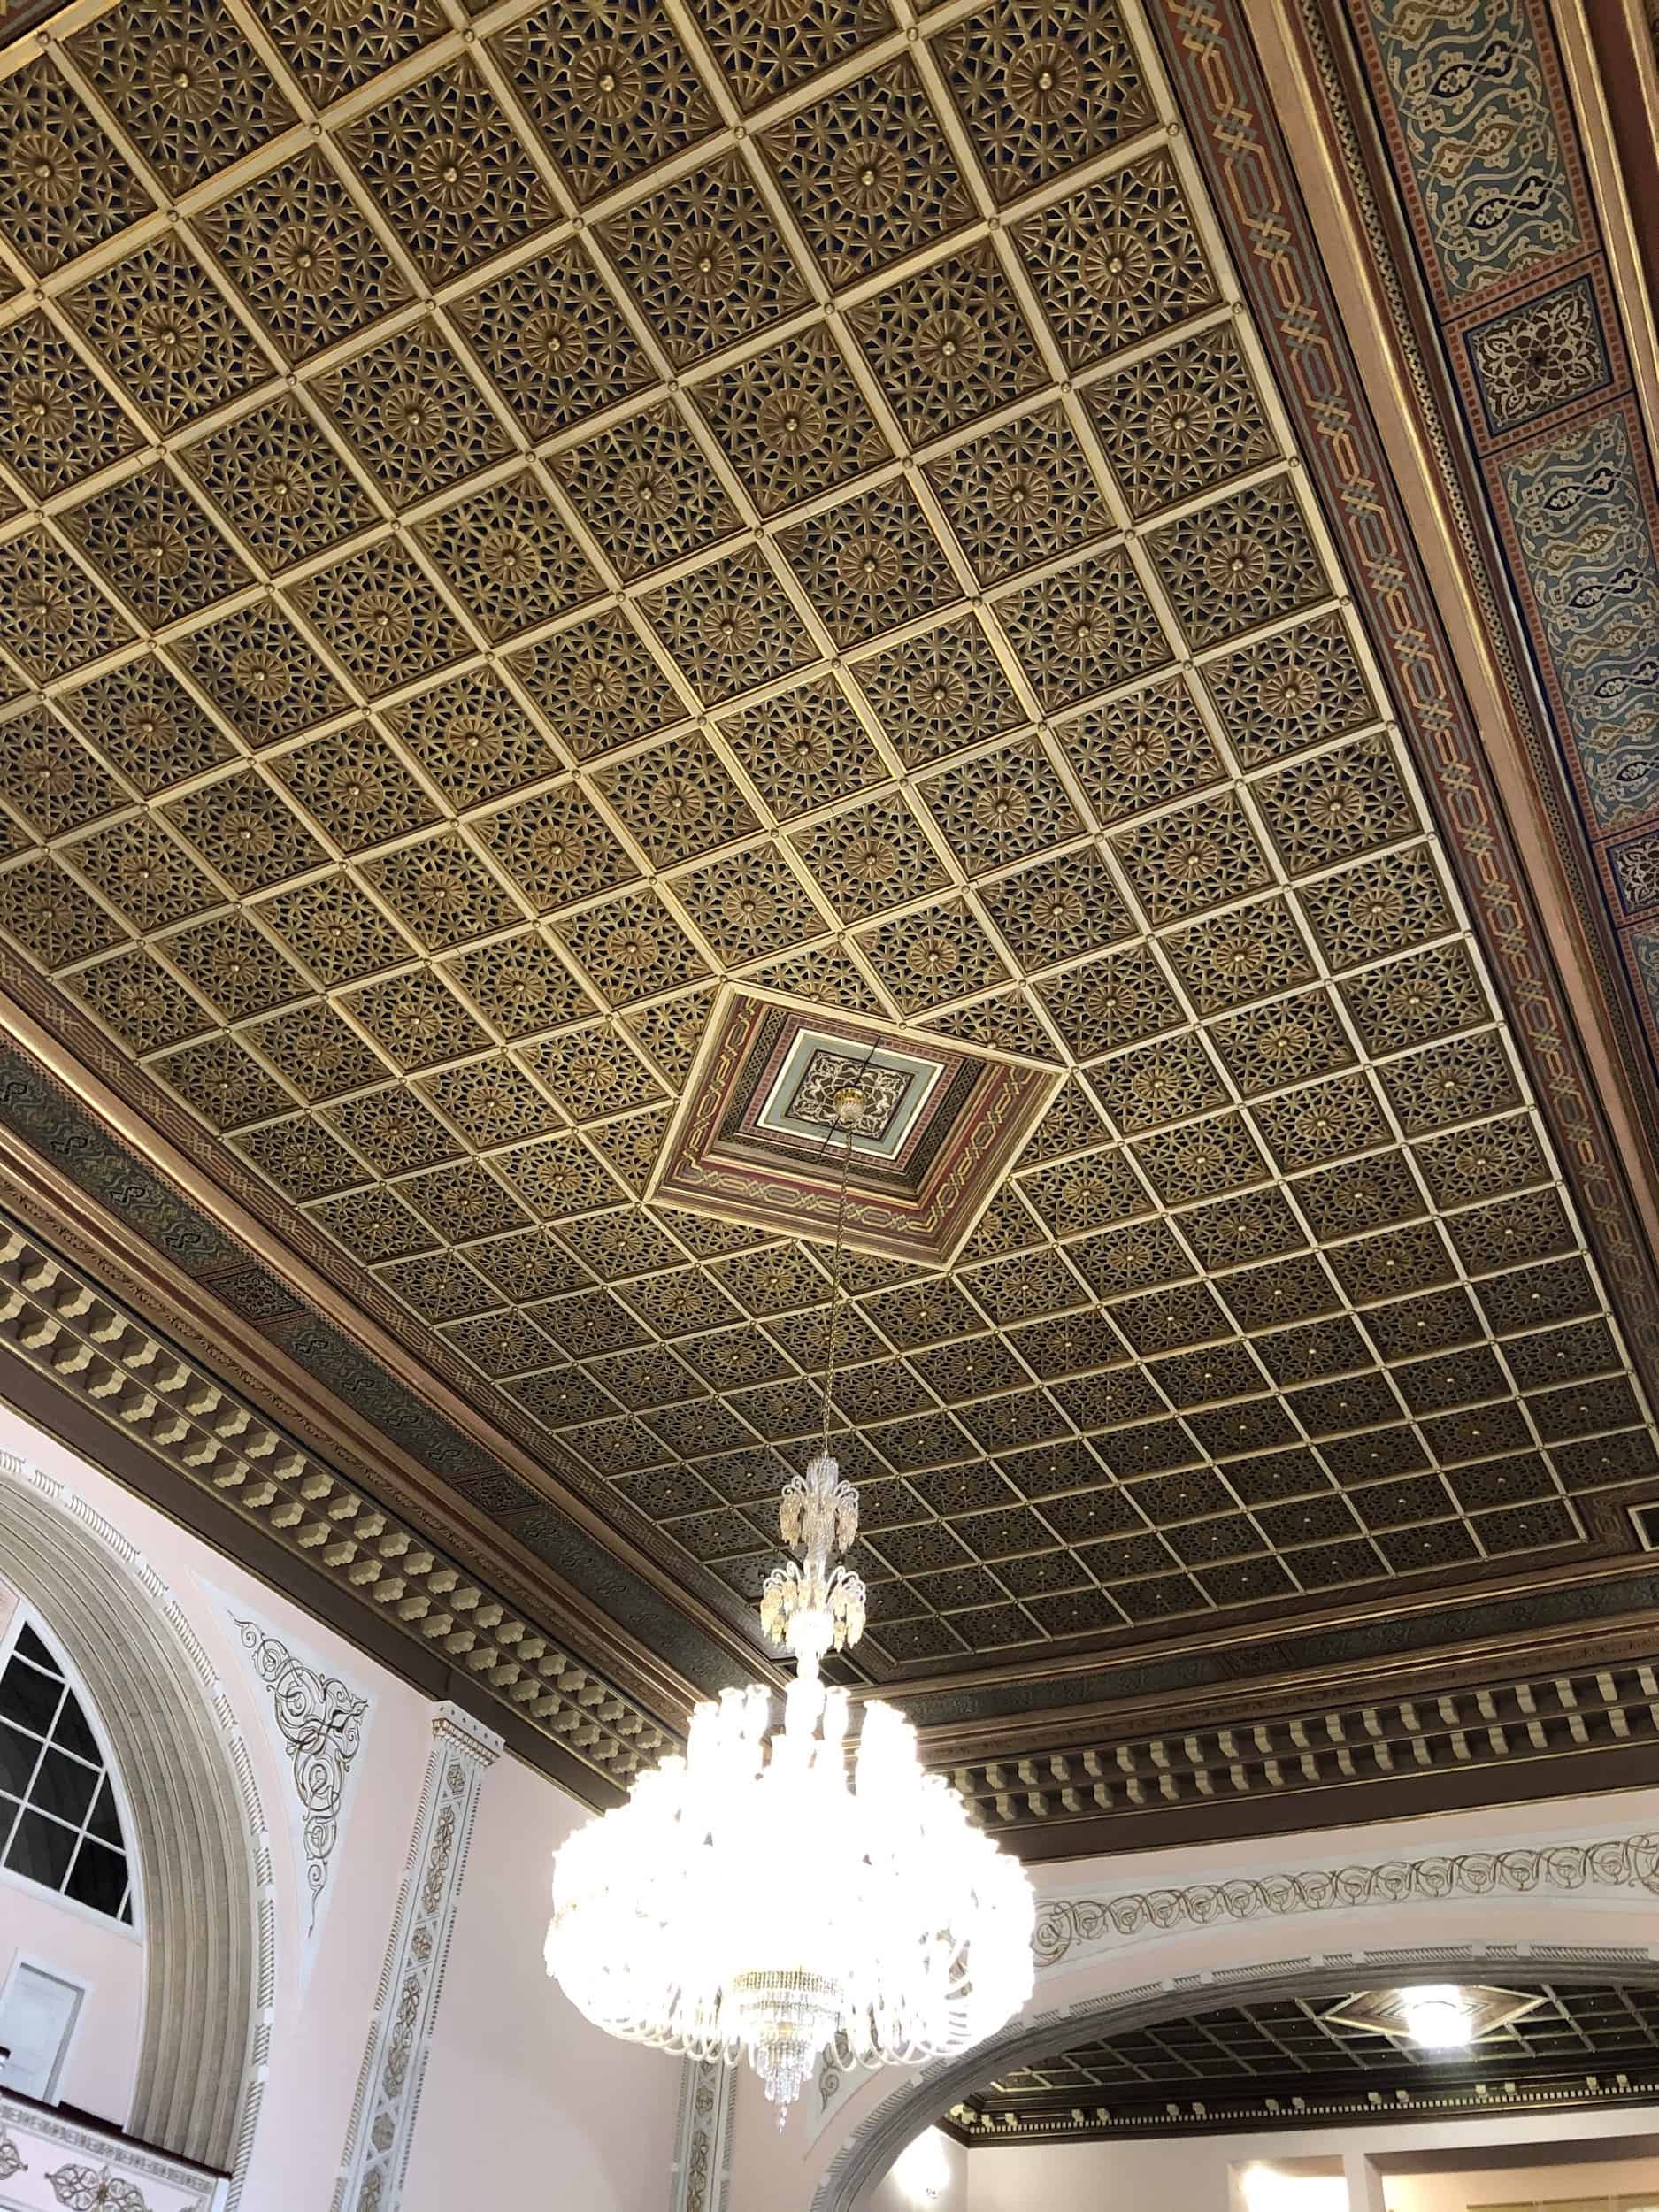 Ceiling of the General Assembly Hall